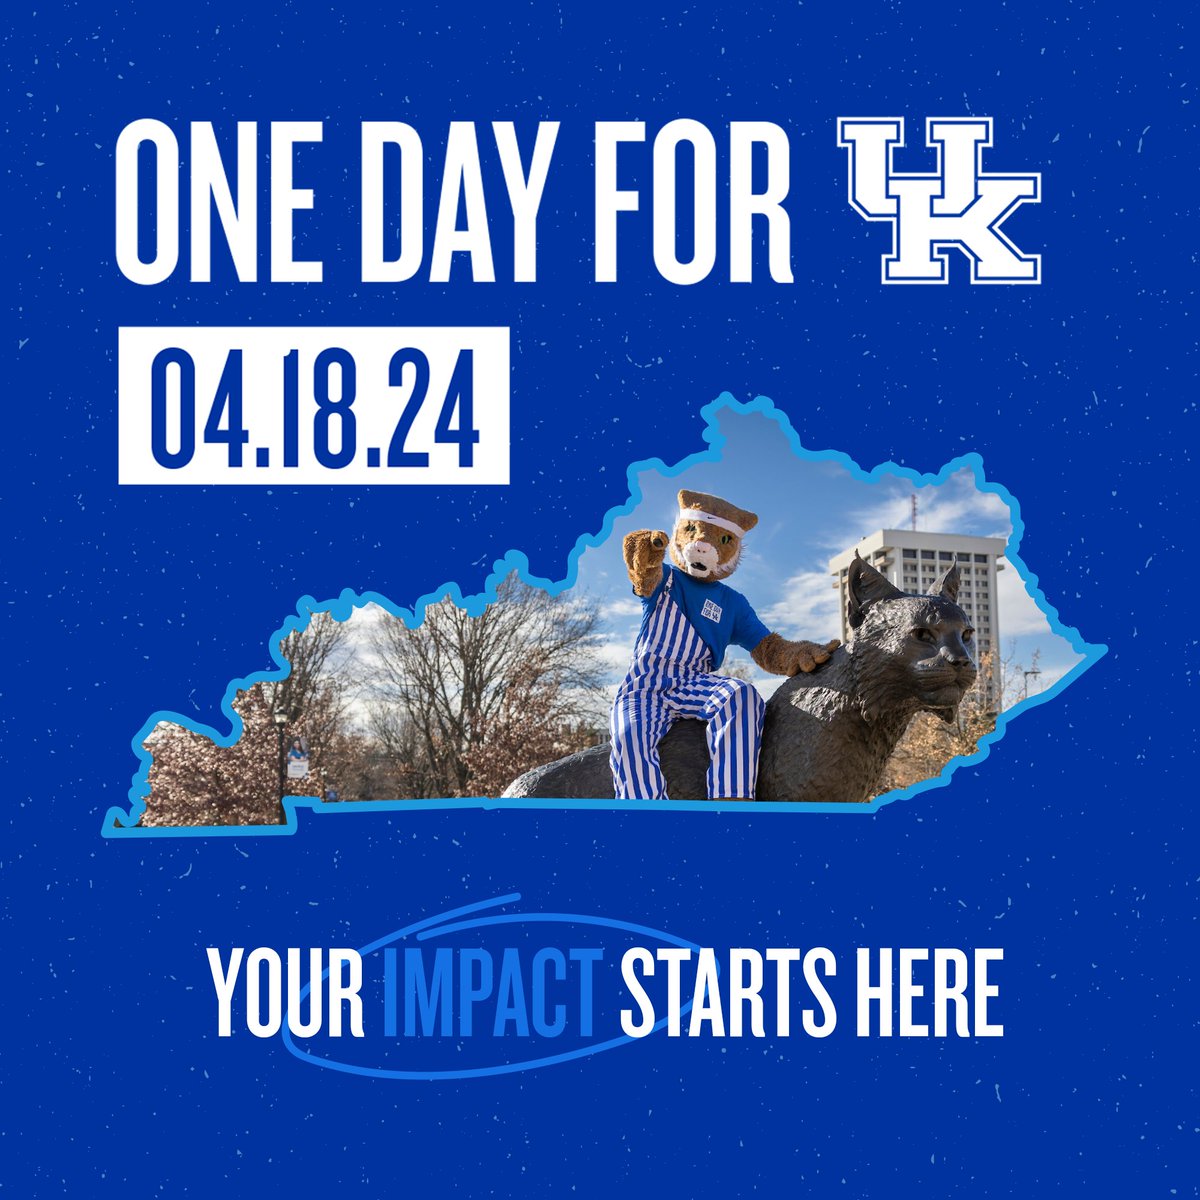 Calling all Wildcats! Mark your calendars ✏️ Thursday, April 18 is #OneDayforUK! Join our 24-hour giving day and support student careers with the Workforce Ready Wildcats Fund. Your 🎁 = 💼 internships, career services, and more! #YourImpactStartsHere